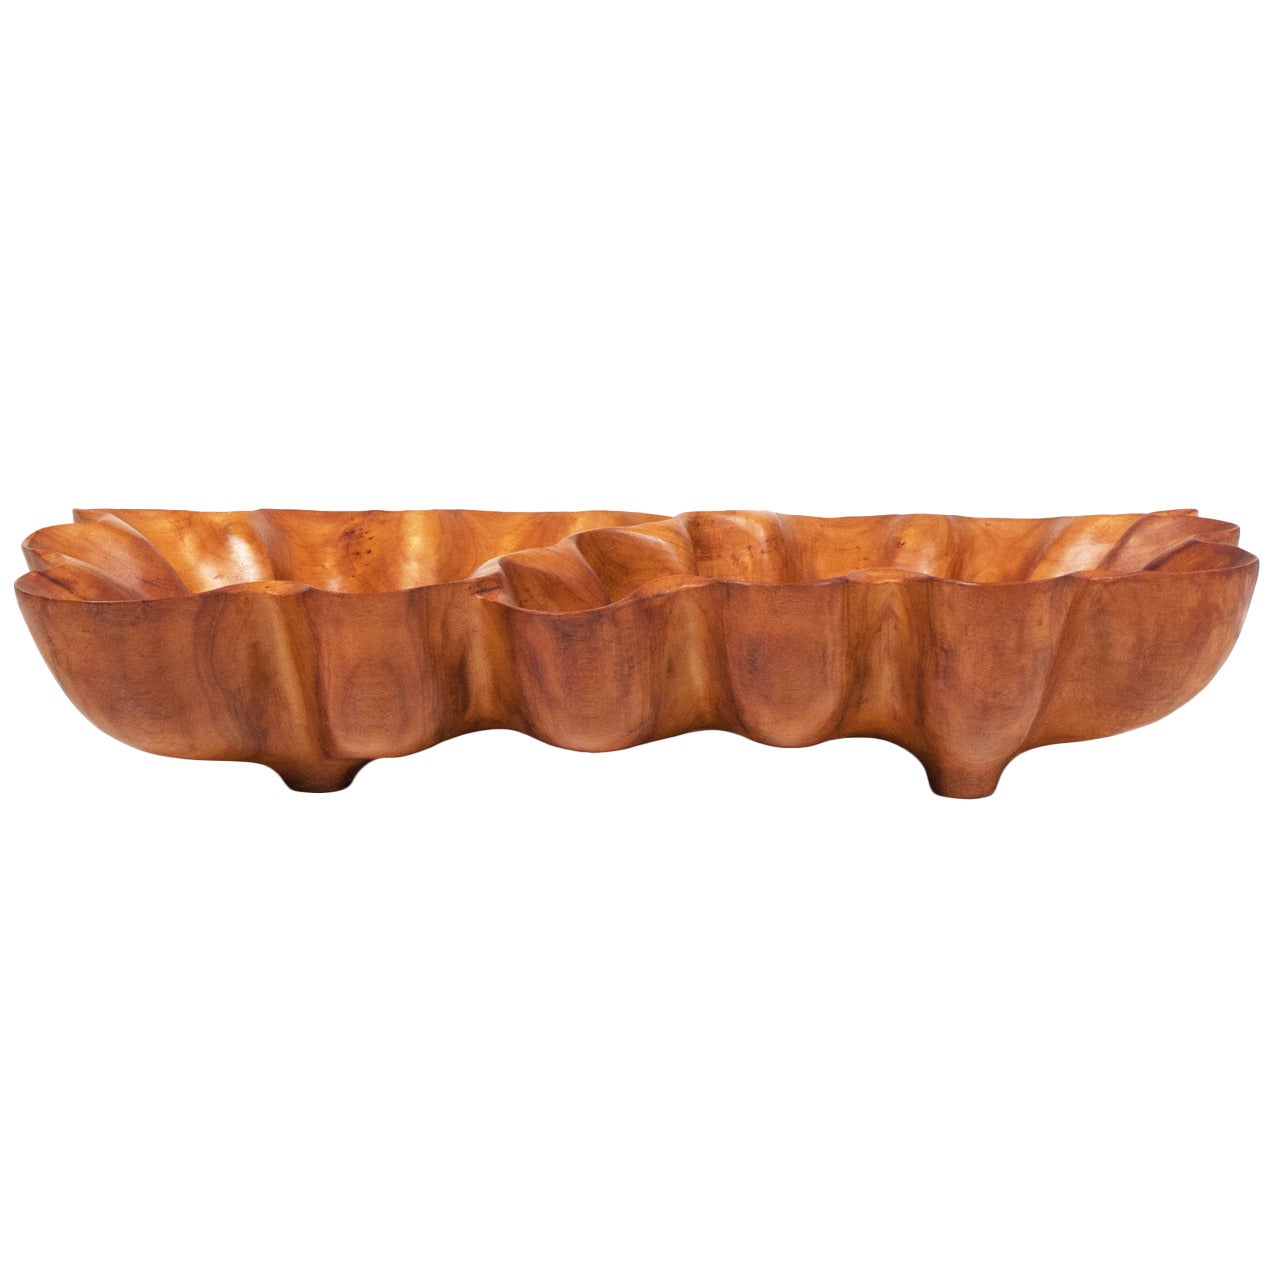 Very Large Double Sided Wooden Bowl Attributed to Russel Wright